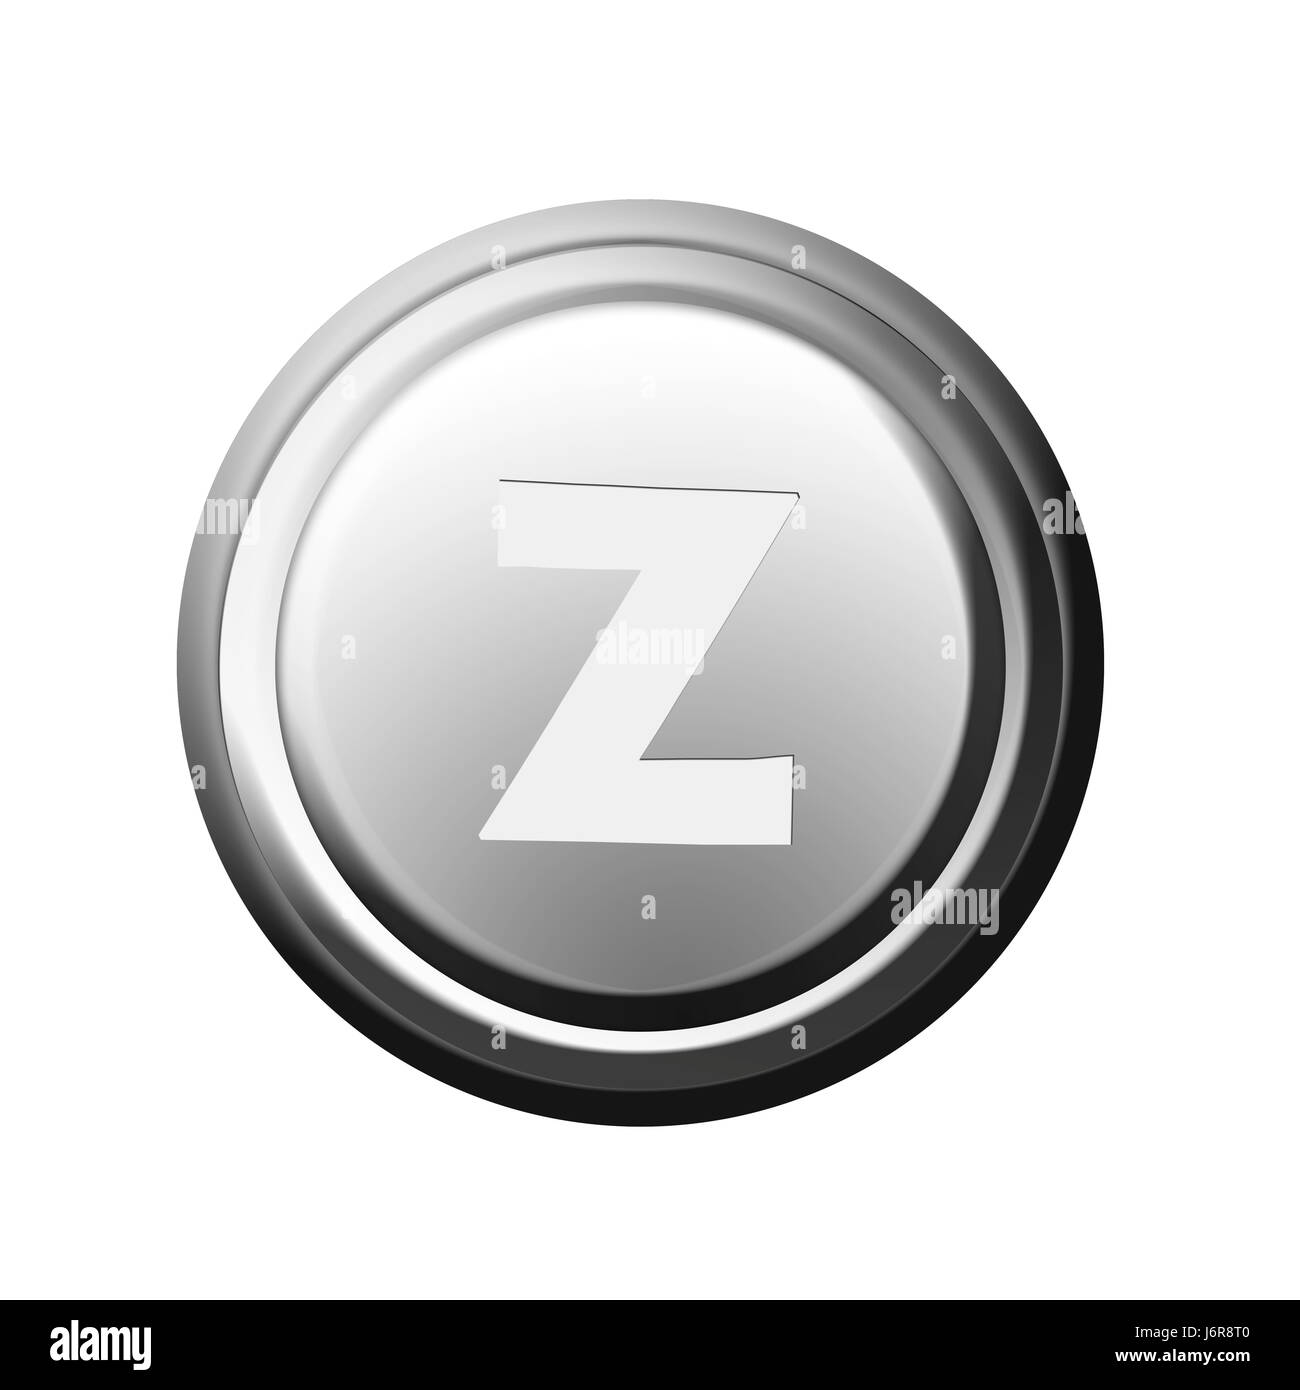 The letter z Black and White Stock Photos & Images - Alamy